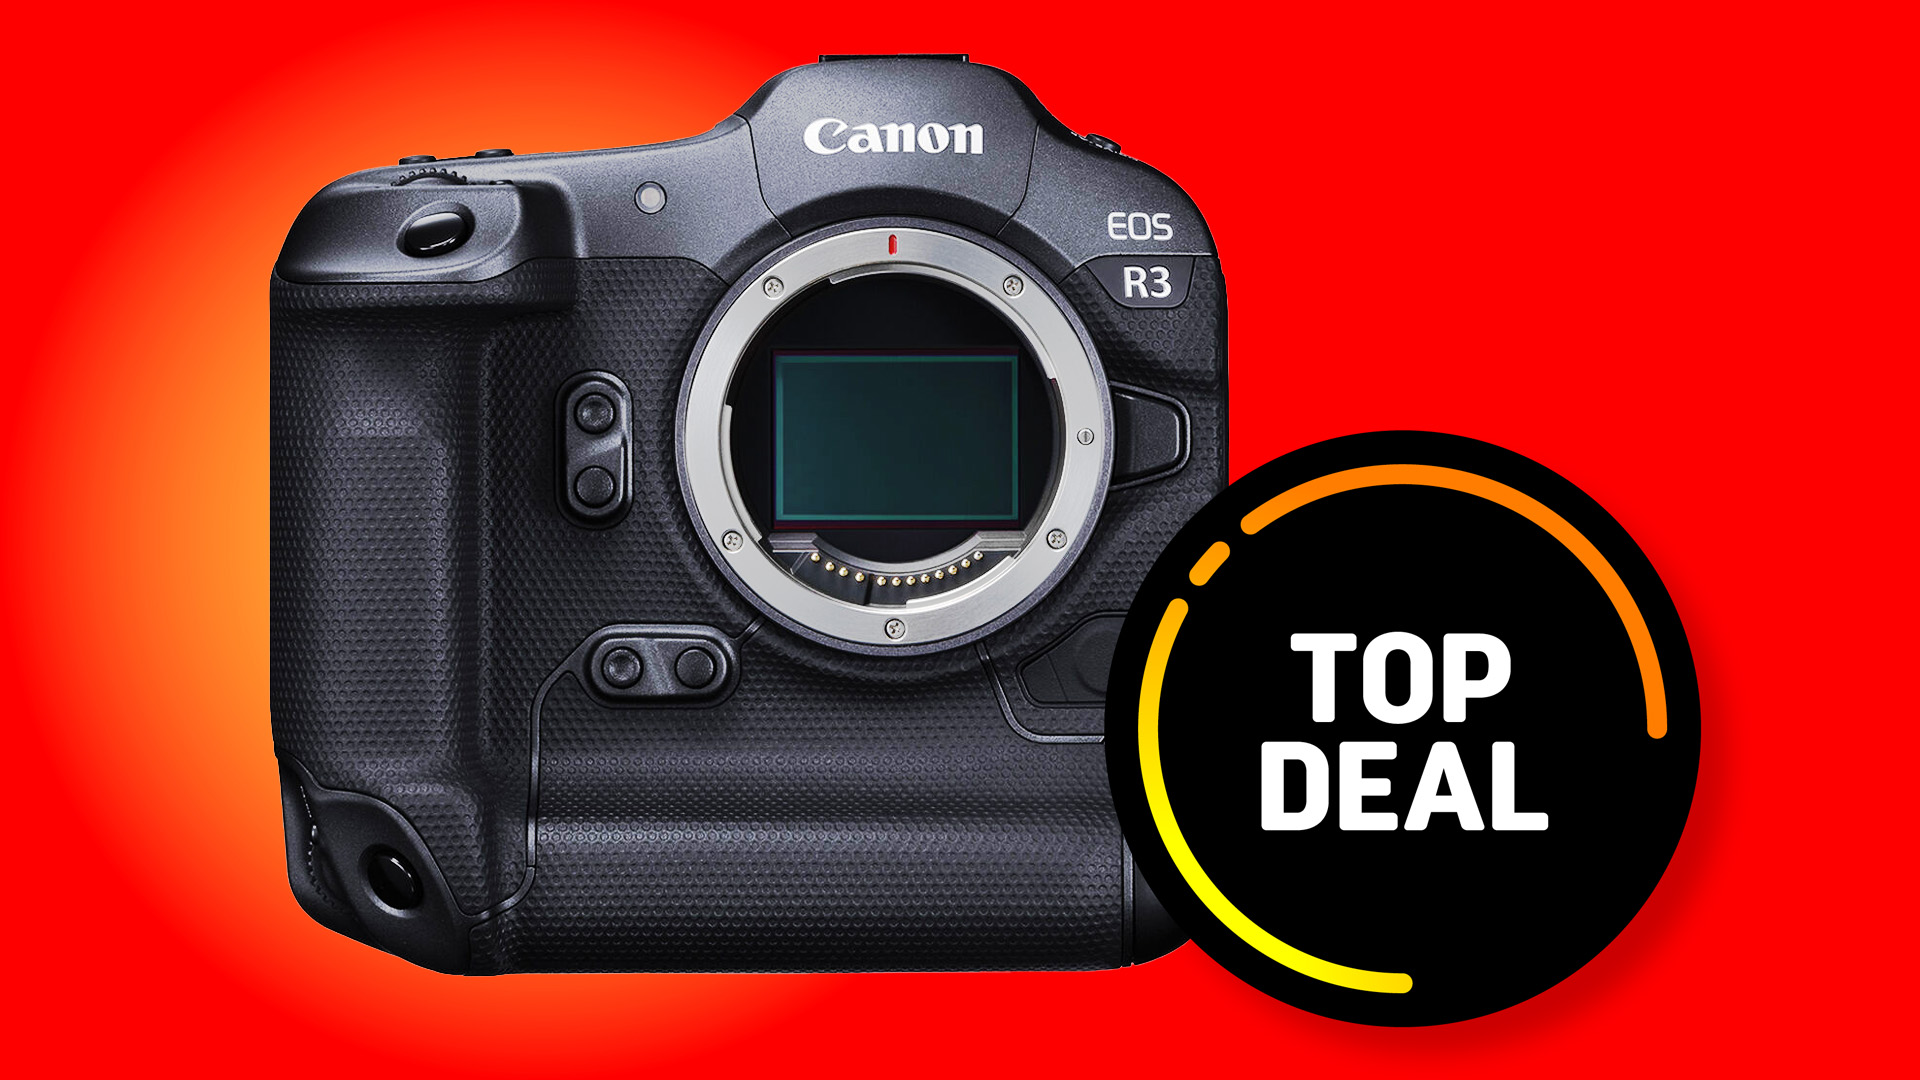 Canon R3 gets a HUGE £450 price drop. It's not the lowest ever, but it's still considerable!